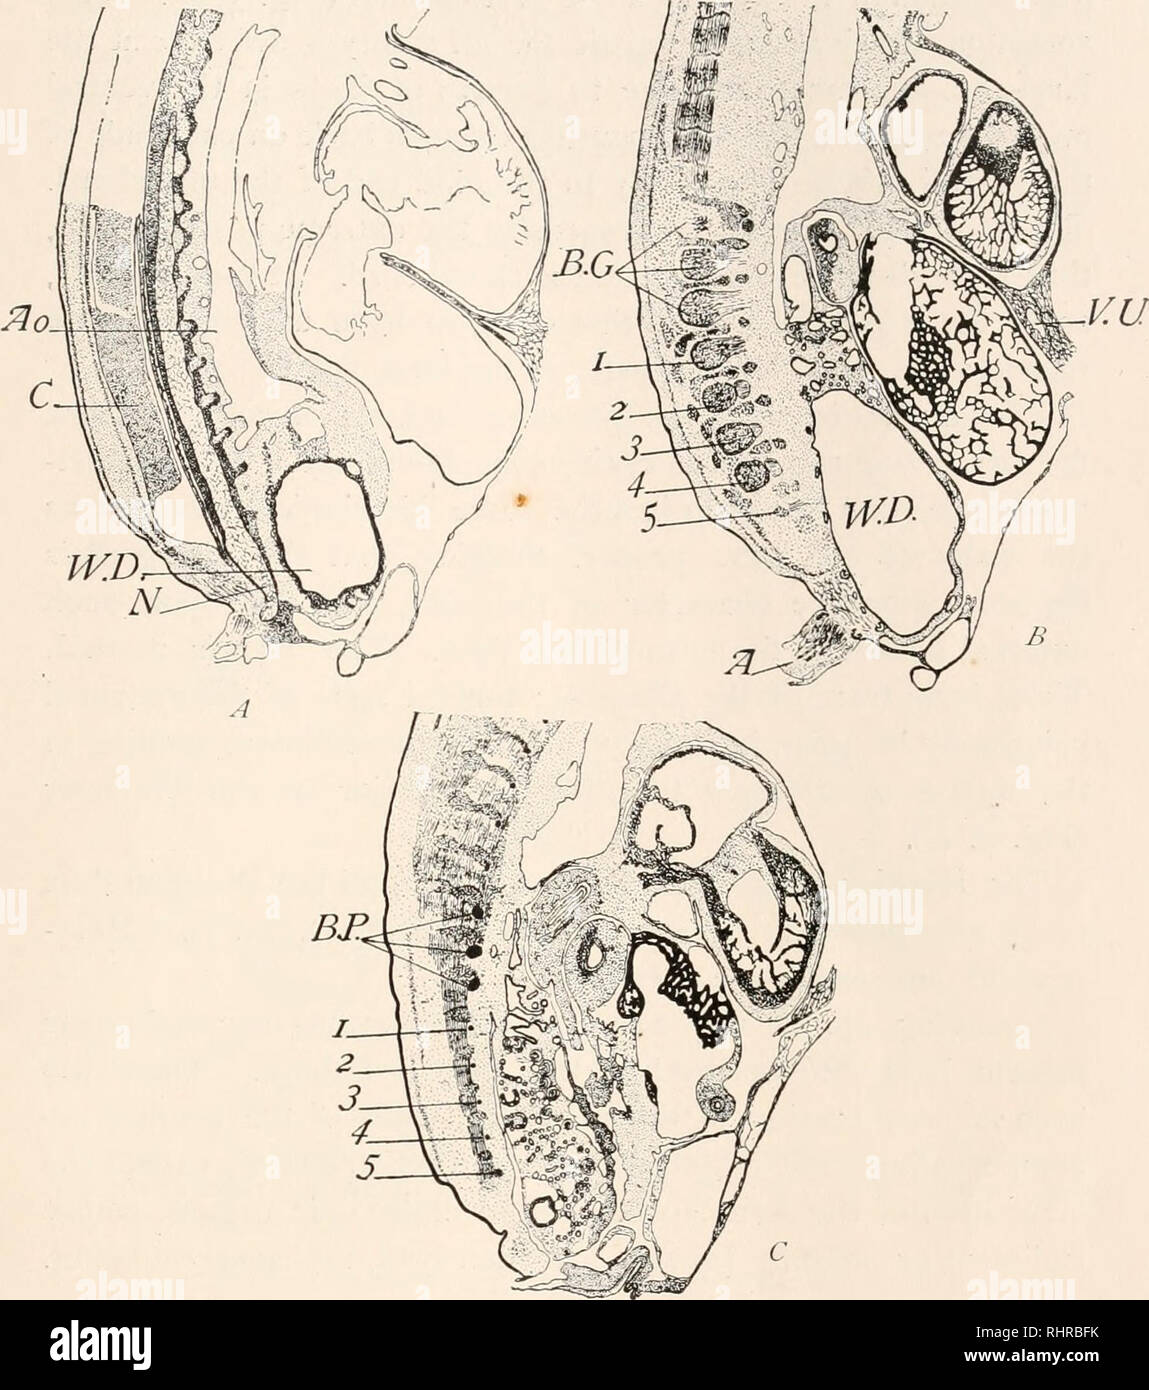 . The Biological bulletin. Biology; Zoology; Biology; Marine Biology. DEVELOPMENT OF EMBRYO OF FOWL. 43 being very small, and evidently partially destroyed by the opera- tion. As the first leg-somite is the seventh post-brachial, the absence of rudiments of the hind limbs in this embryo is readily understood. B. FIG. 5. Three sections from a sagittal series through the embryo shown in Fig. 4. A, amnion ; Ao., aorta ; B.C., ganglia of the nerves of the wing ; B.P., nerves of wing; C, cord; N, notochord ; V. U., umbilical vein; IV.£)., Wolffian duct; 1-5, first to fifth postbrachial ganglia or n Stock Photo